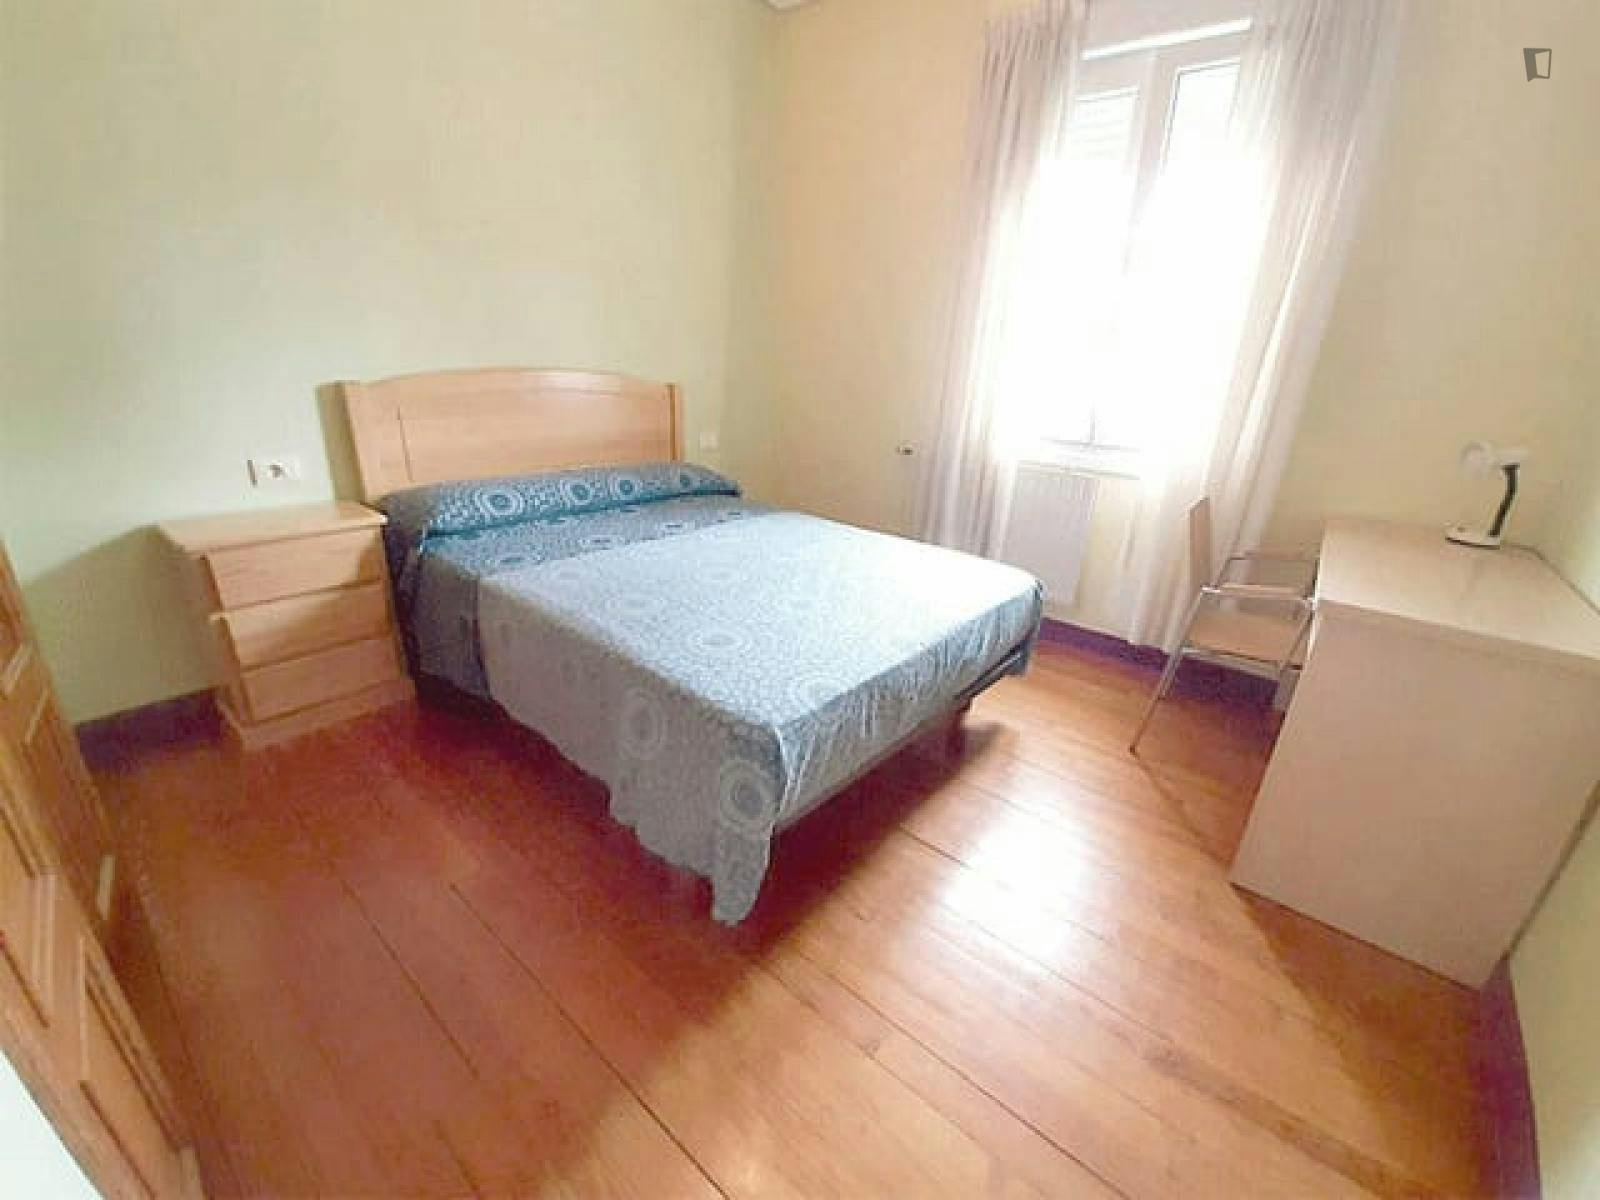 Lovely double bedroom very well connected